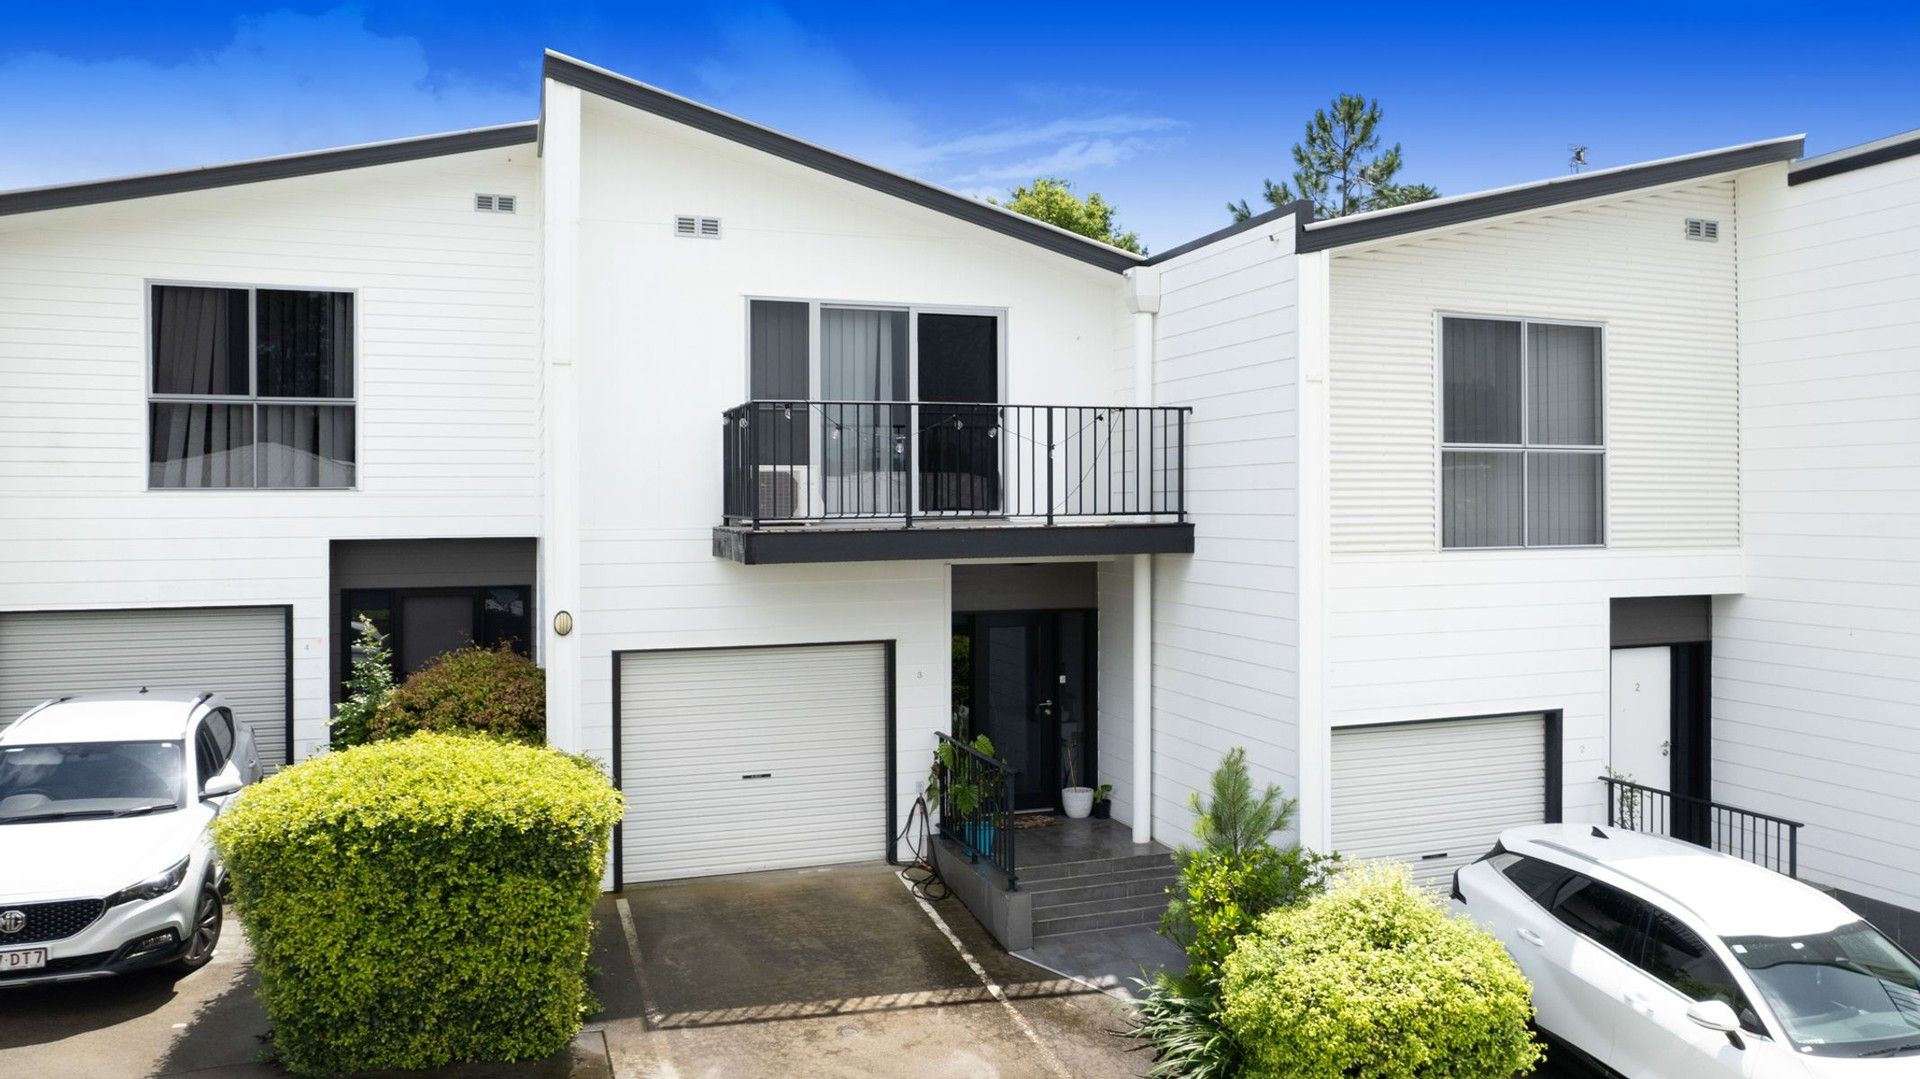 2 bedrooms Townhouse in 3/21 Webster Road NAMBOUR QLD, 4560